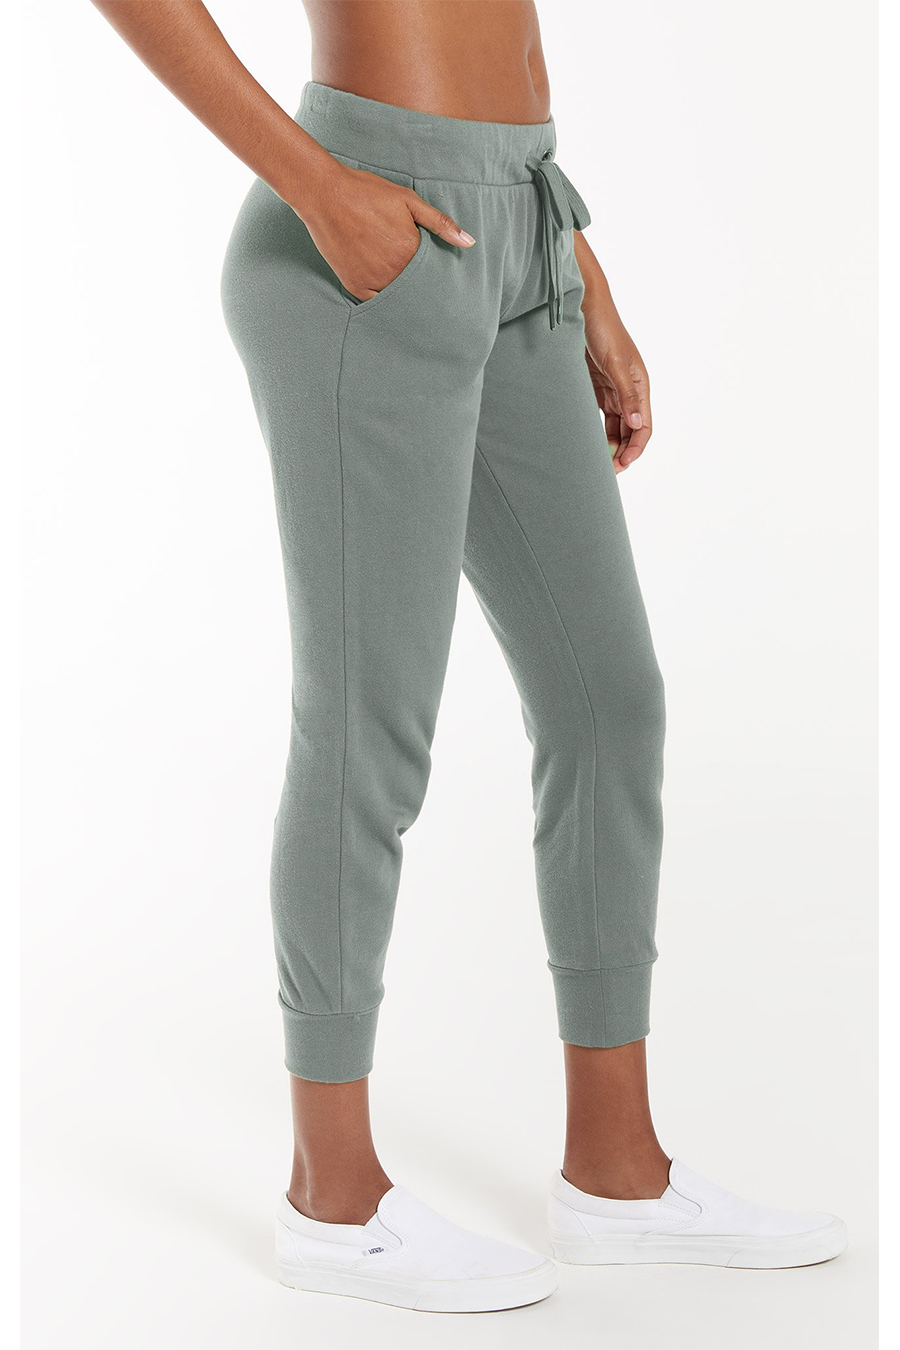 Quinn Classic Jogger | Ash Green - Main Image Number 2 of 3